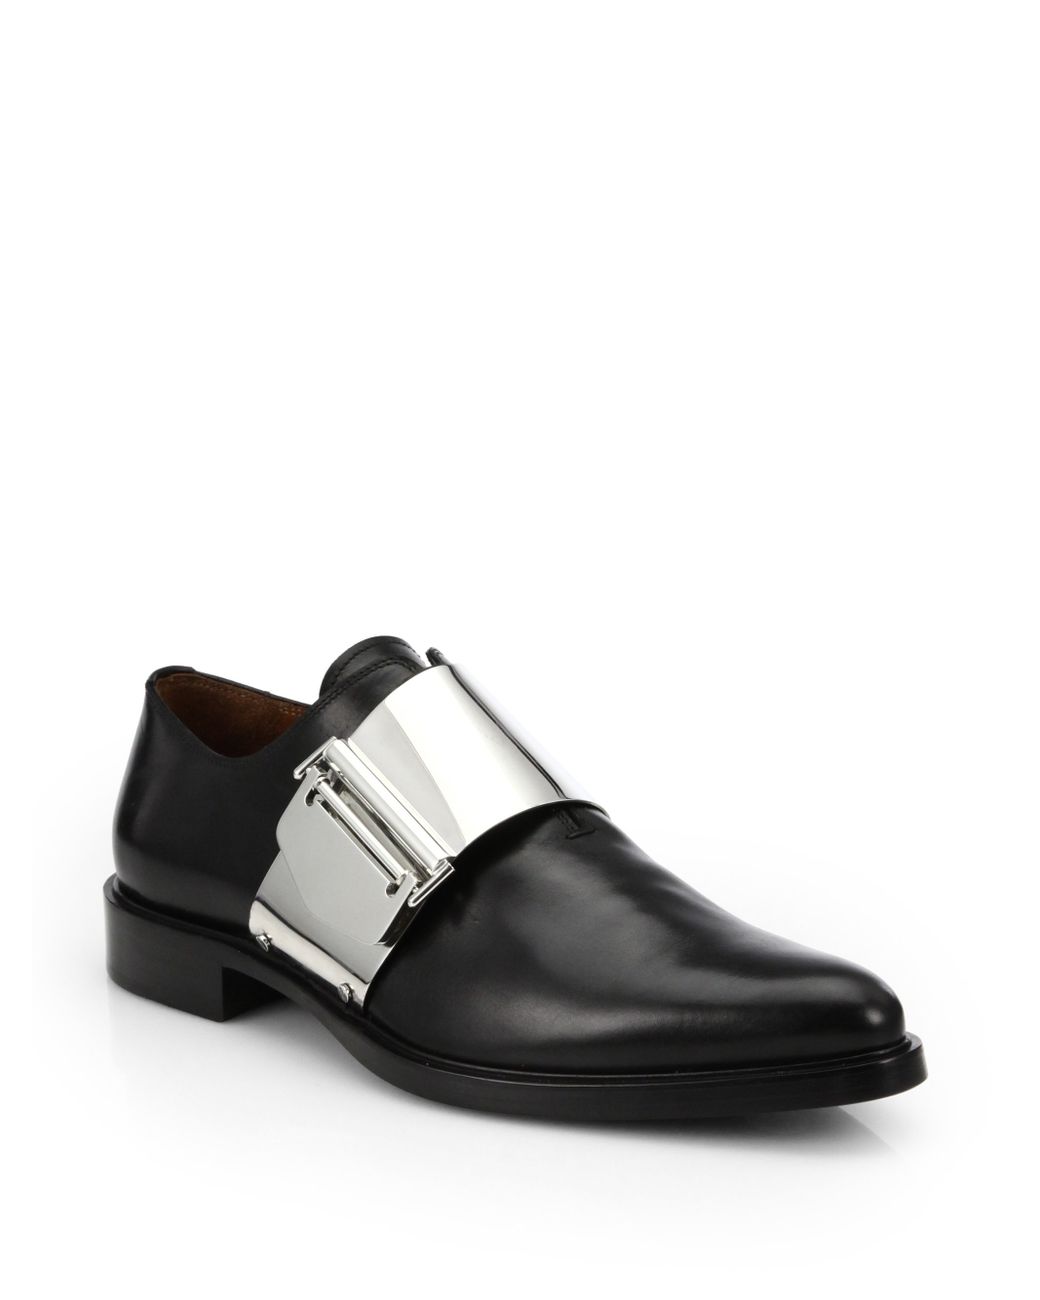 Givenchy Richelieu Metal Buckle Leather Shoes in Metallic for Men | Lyst